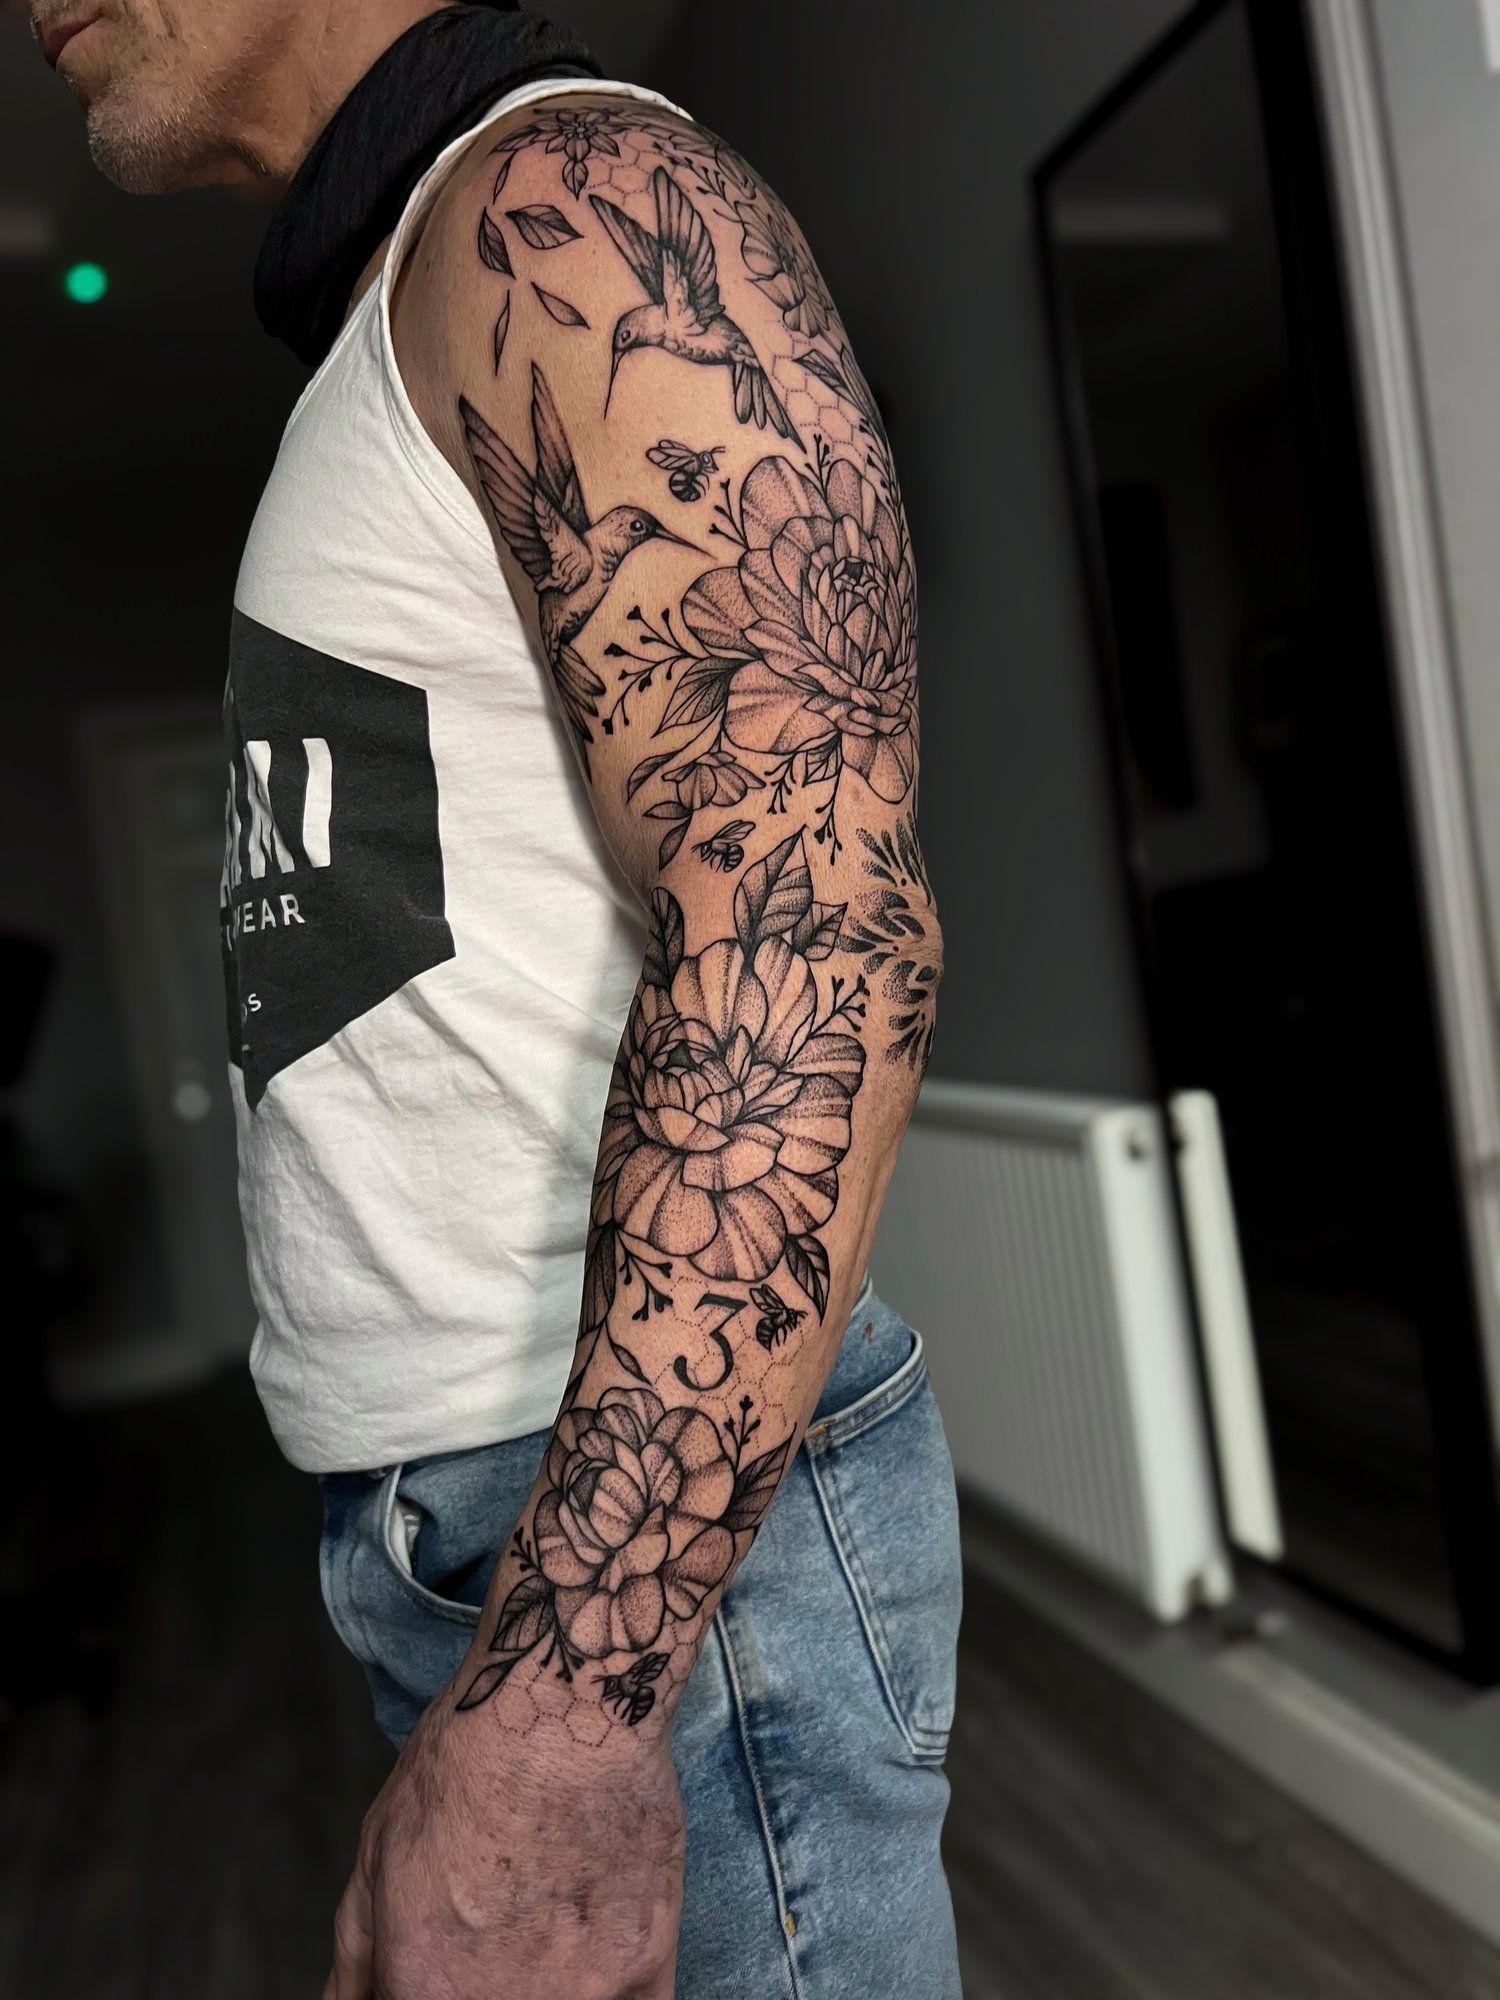 A man with a full sleeve tattoo on his arm.